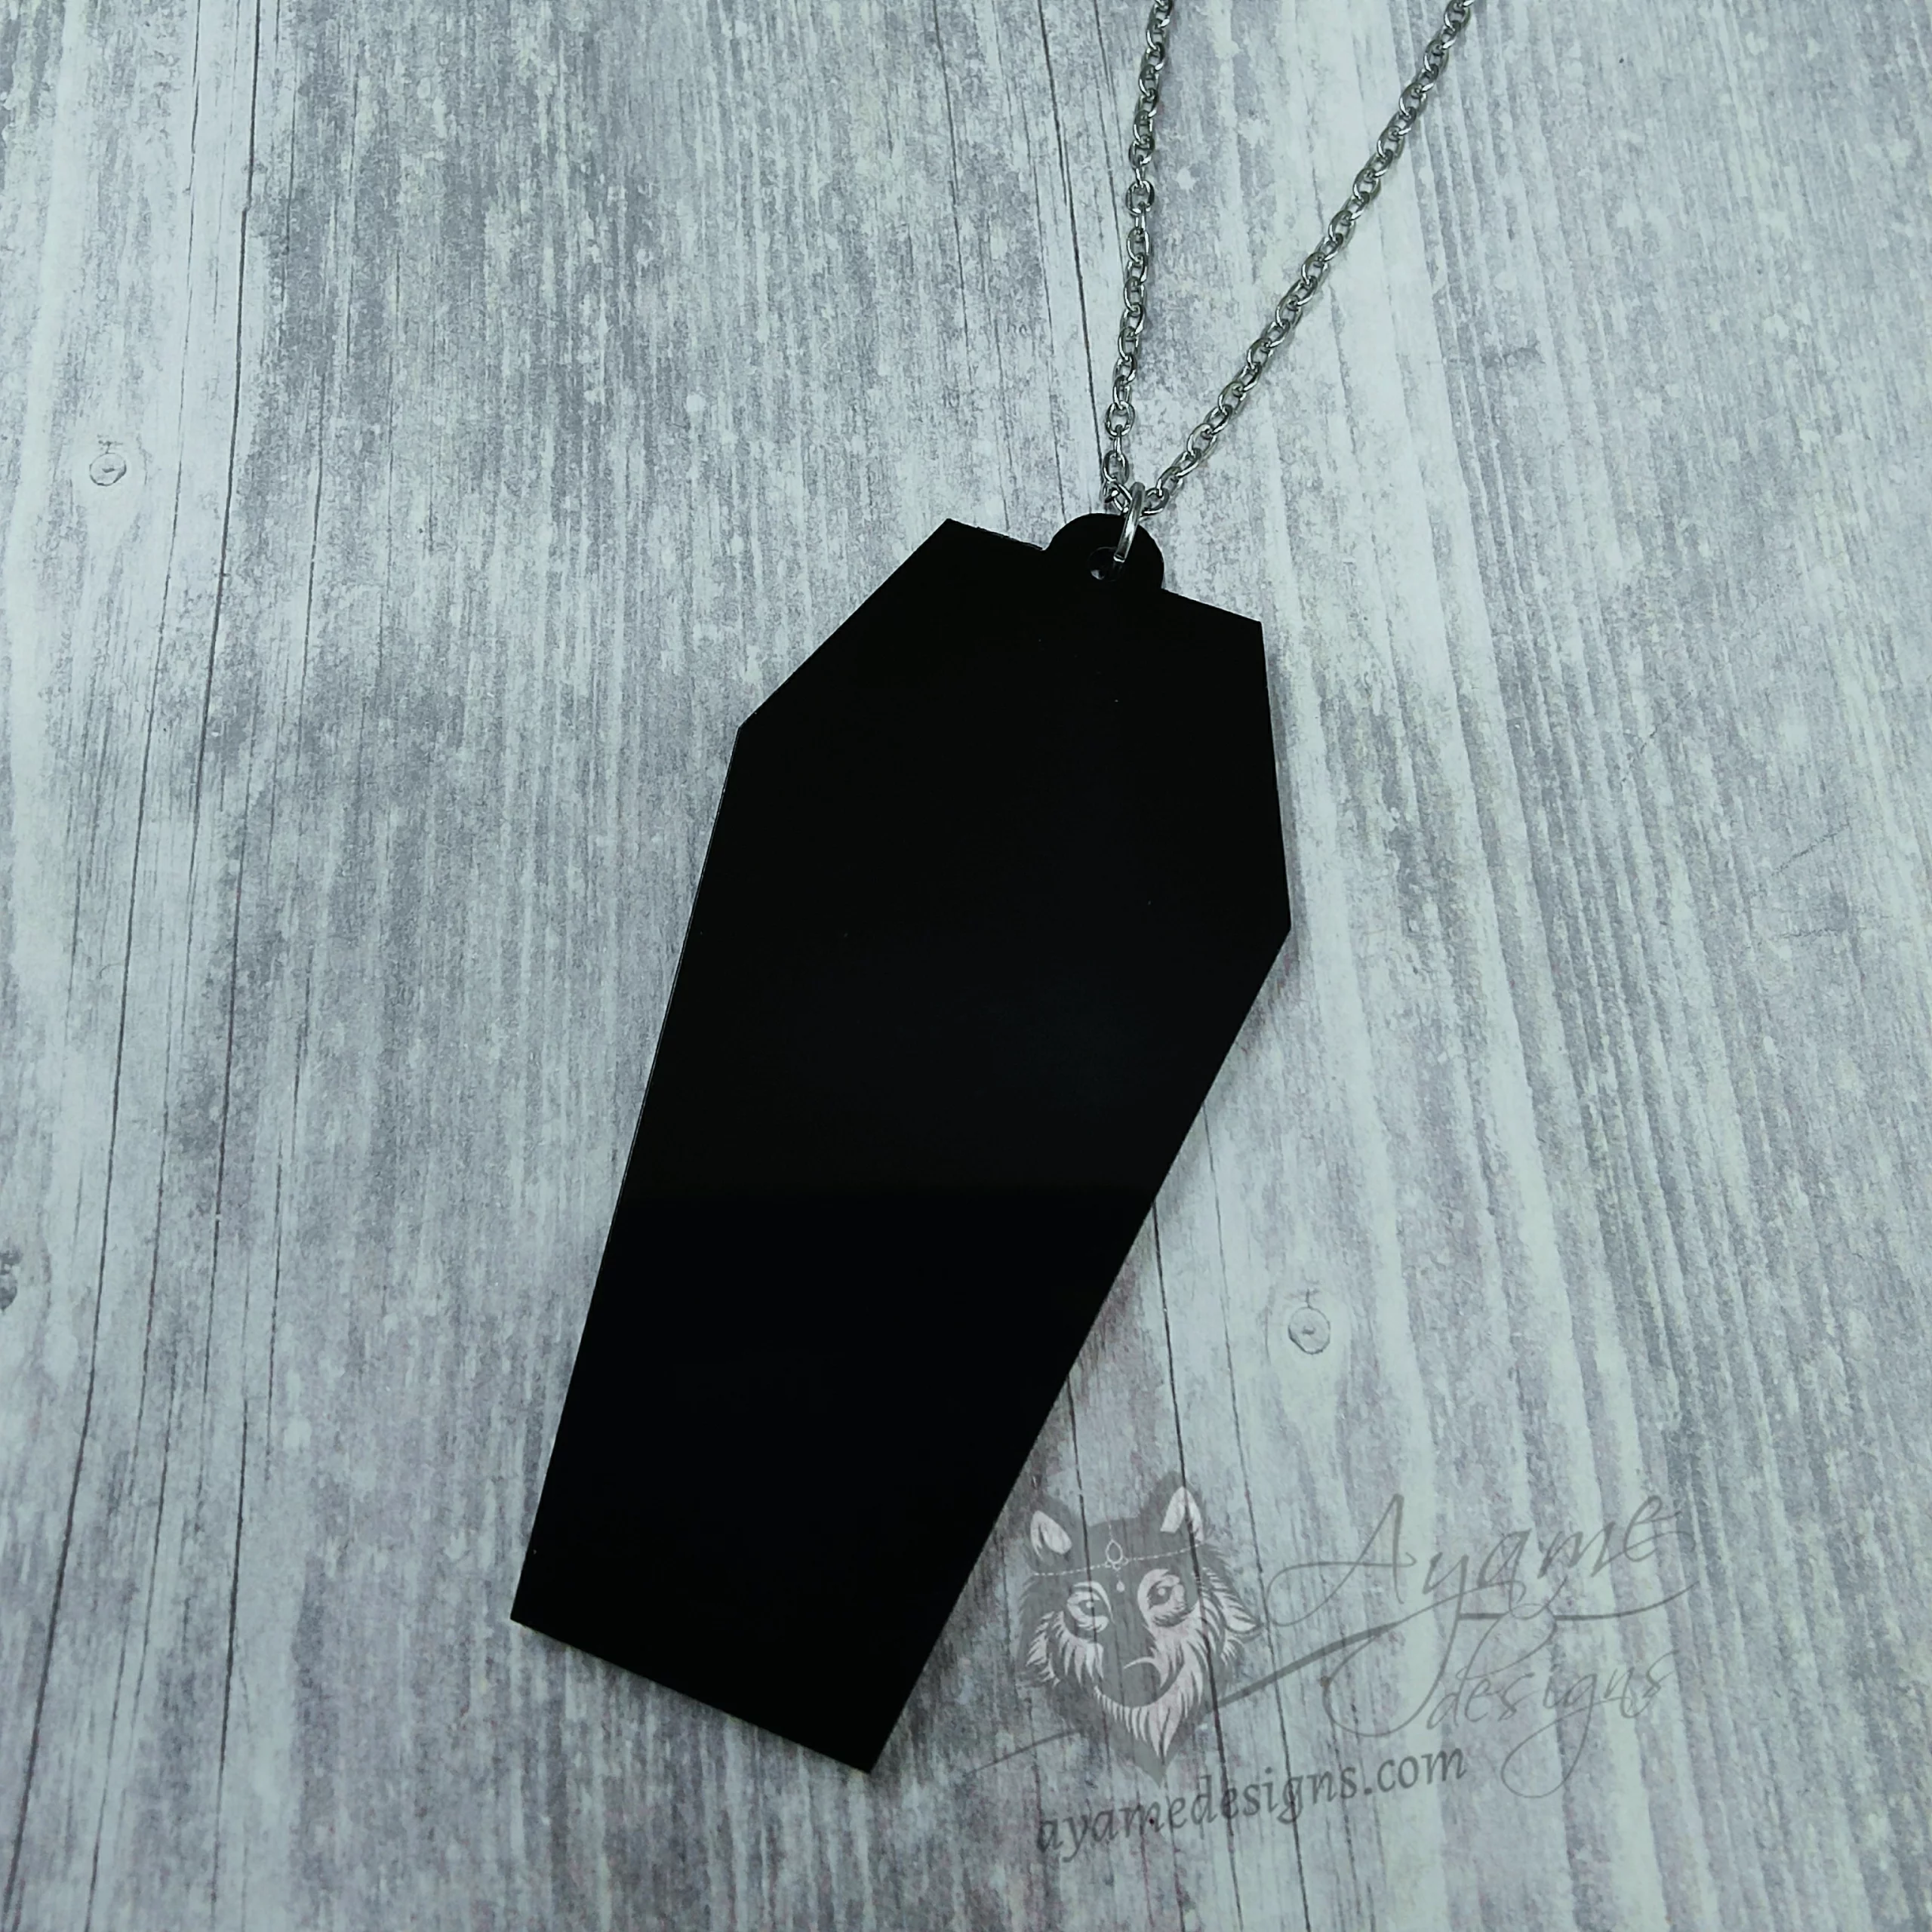 A laser cut perspex coffin pendant on a stainless steel adjustable chain